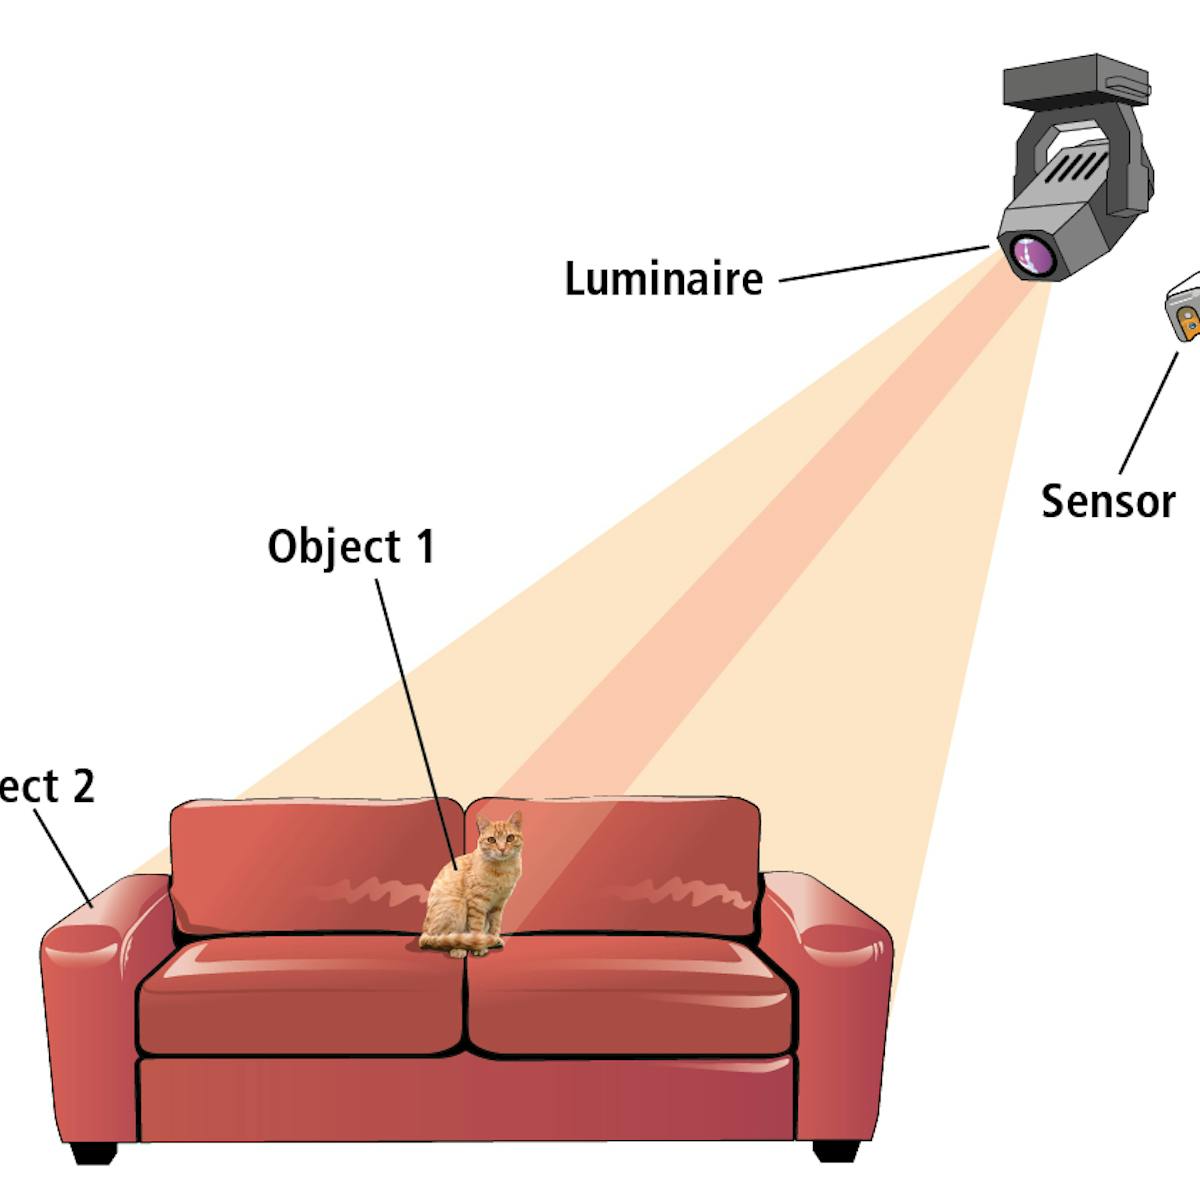 FIG. 1. A possible implementation of a spectrally-optimizable lighting system illustrates the role of sensors to detect reflectance from objects to emit light tuned to the spectra of each object, rendering realistic color and detail. (Image credit: Graphic concept by Dorukalp Durmus, illustrated by Mike Reeder.)